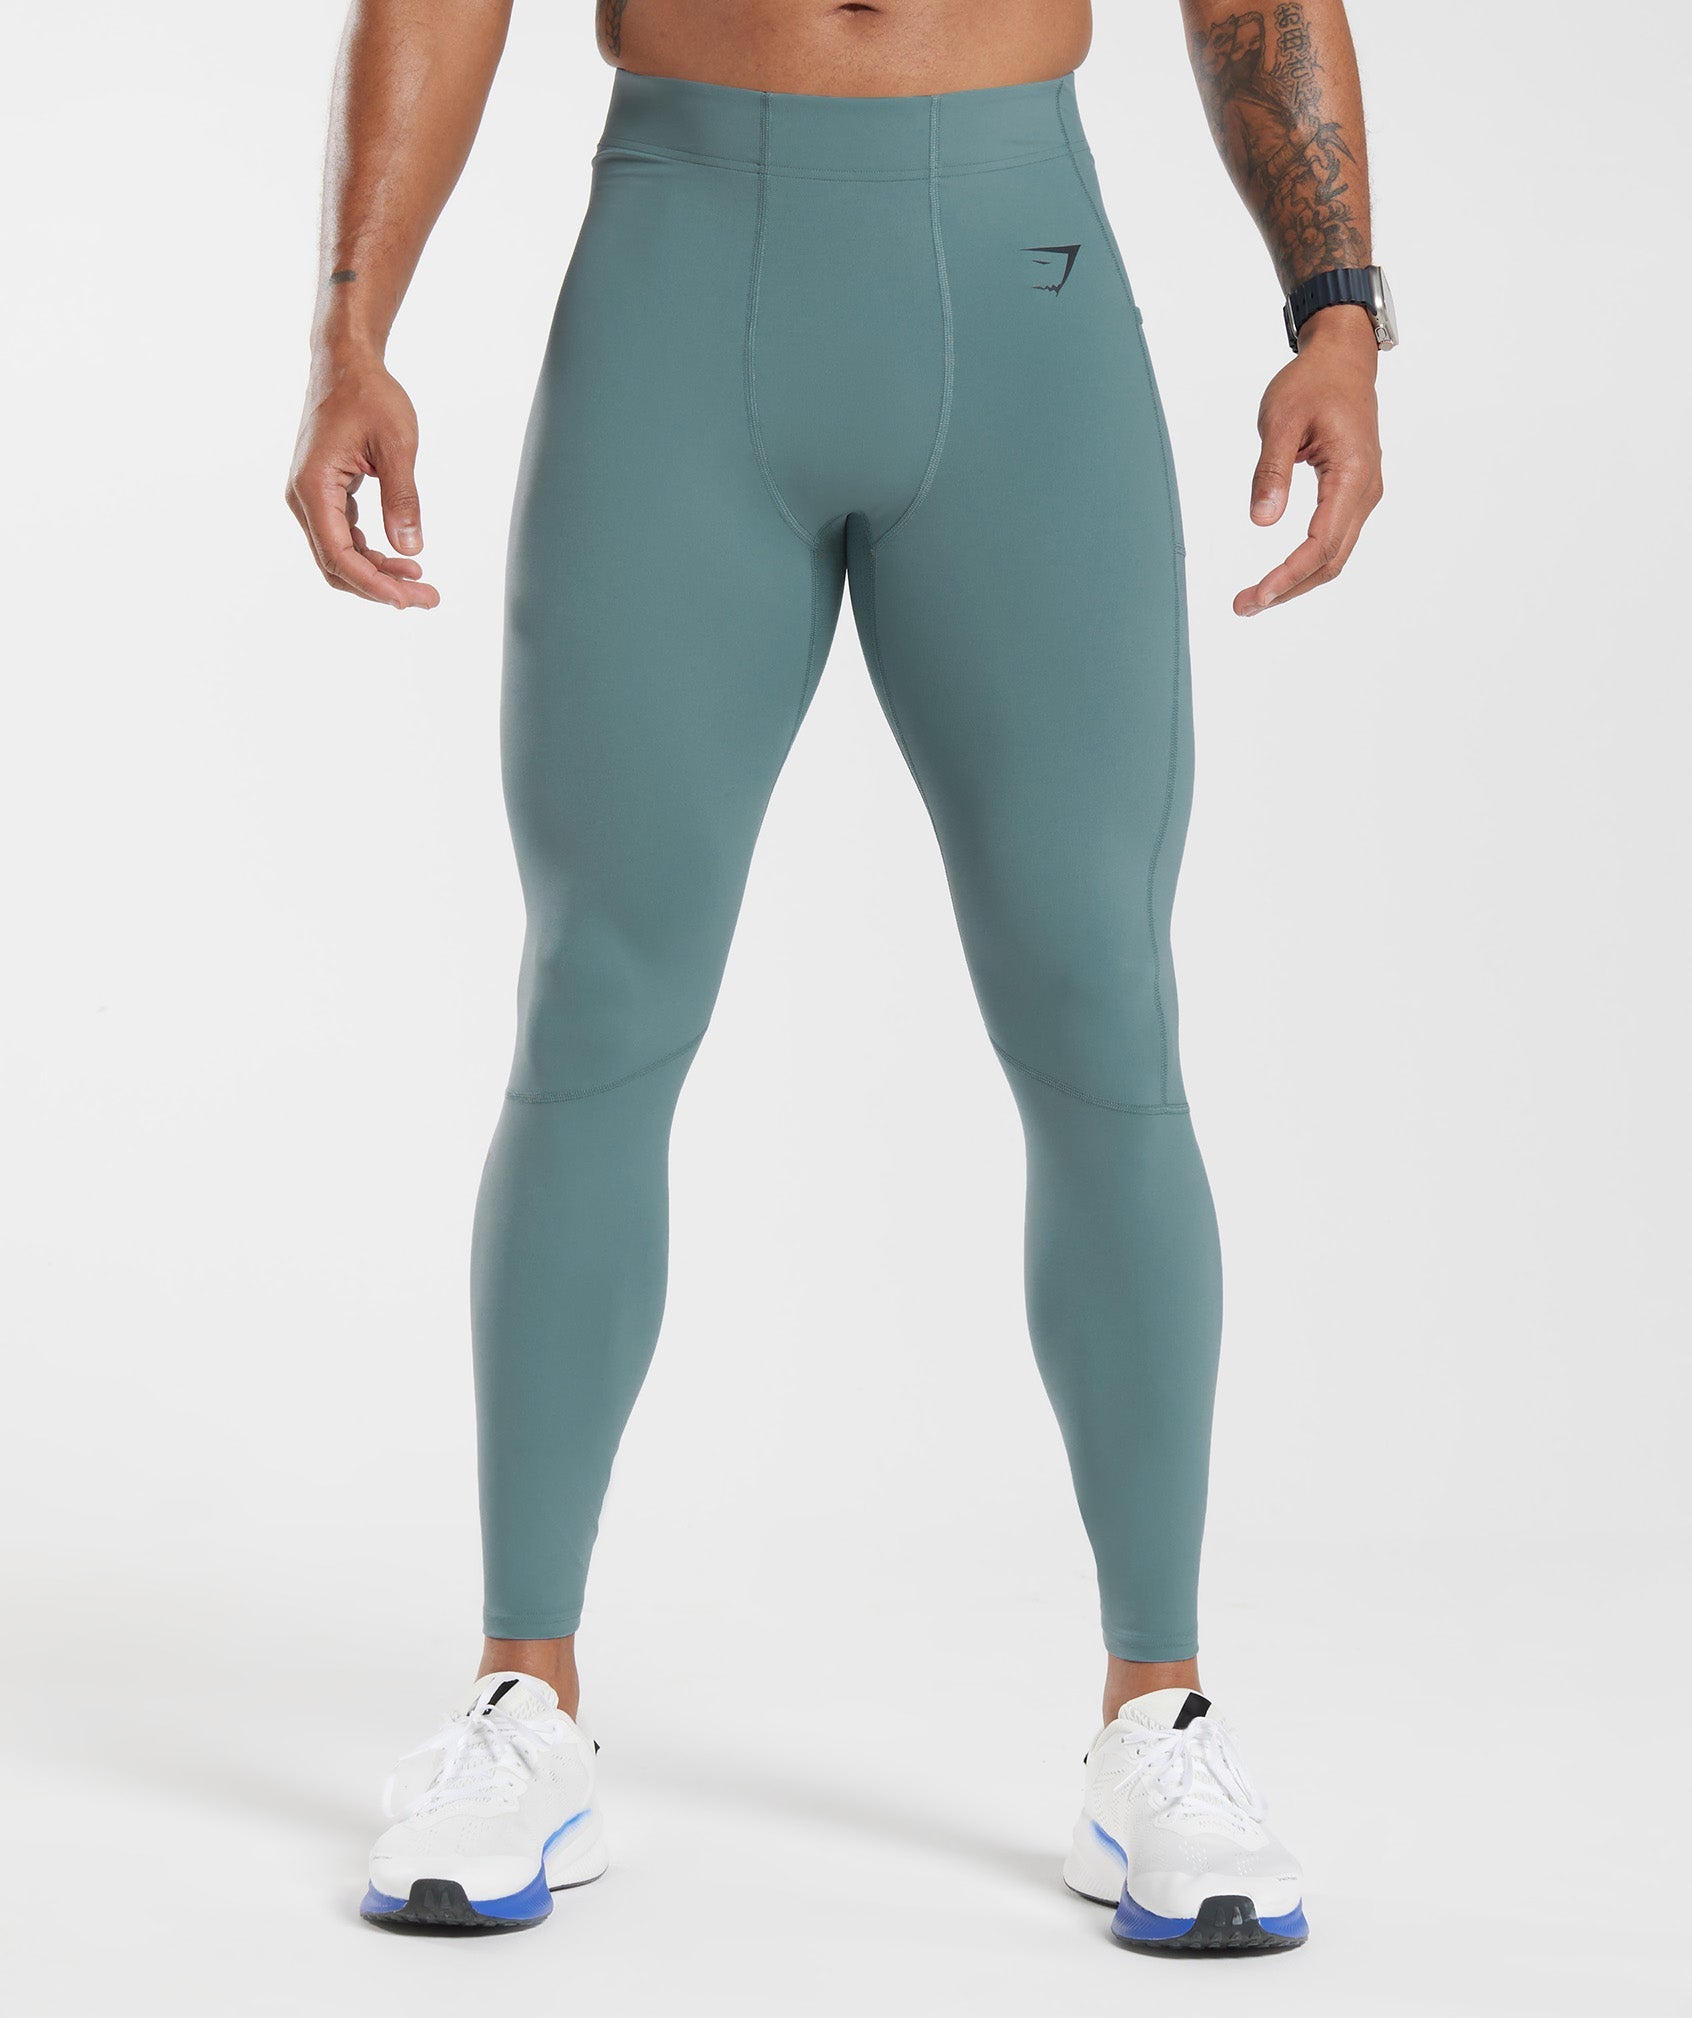 Gymshark Women's Crossover Leggings Thunder Blue Color NWT Size Small :  r/gym_apparel_for_women